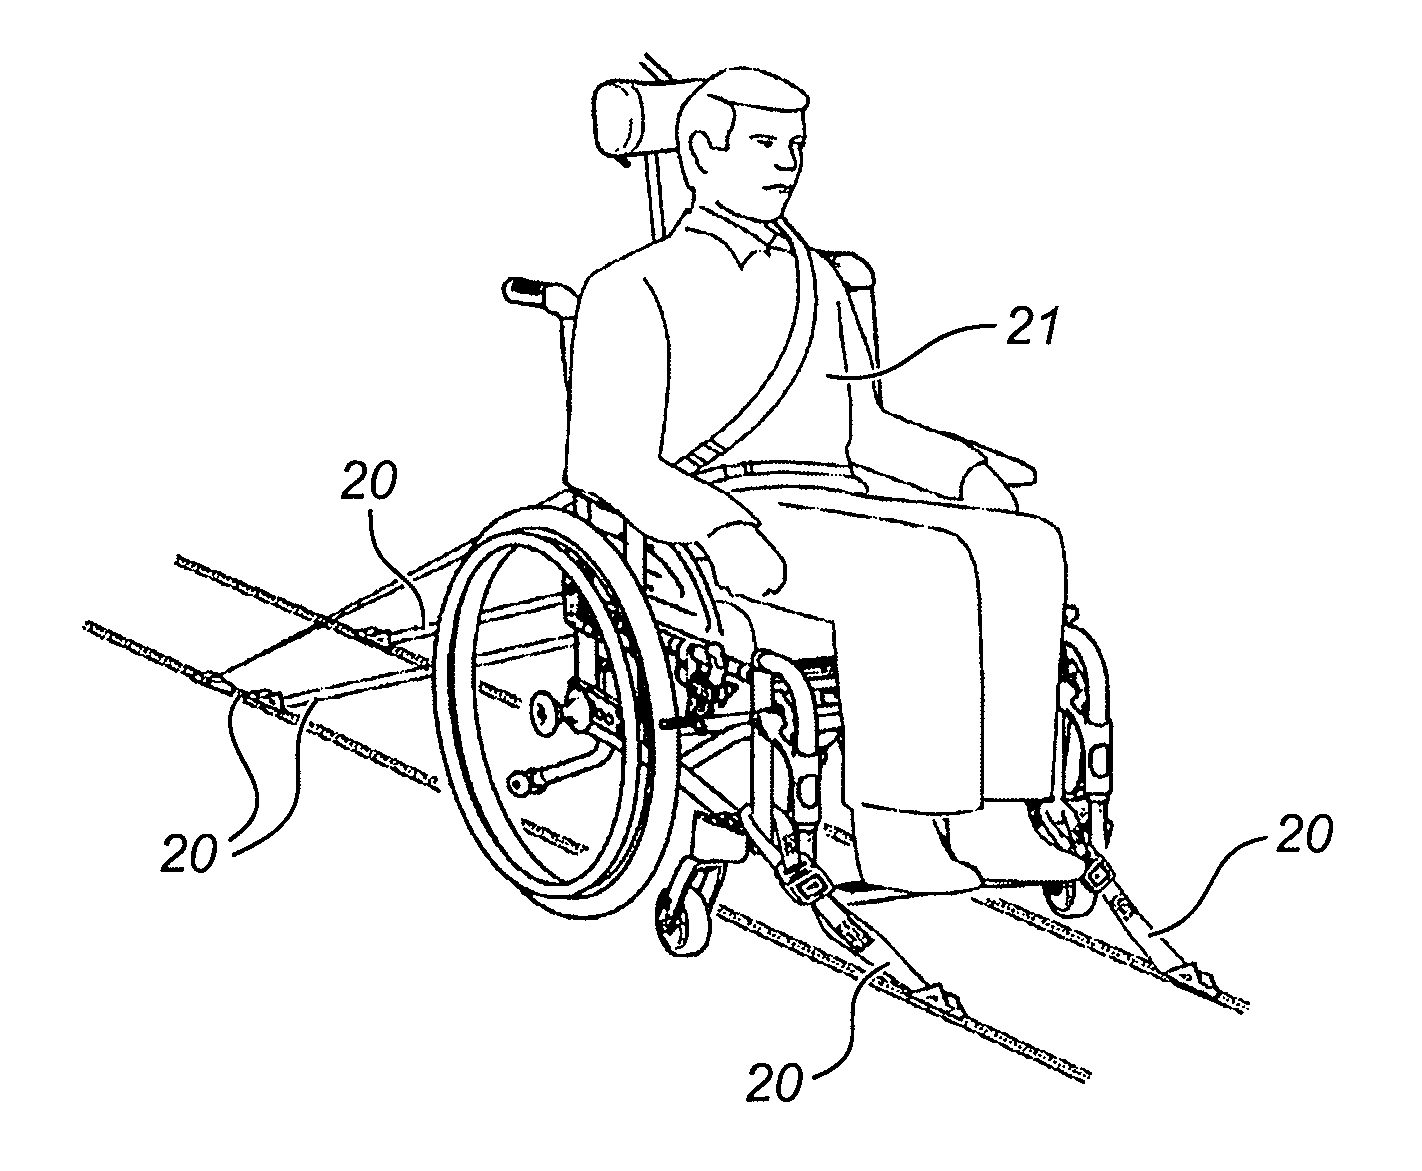 Methods for ensuring the safety of a wheelchair passenger in a transport vehicle